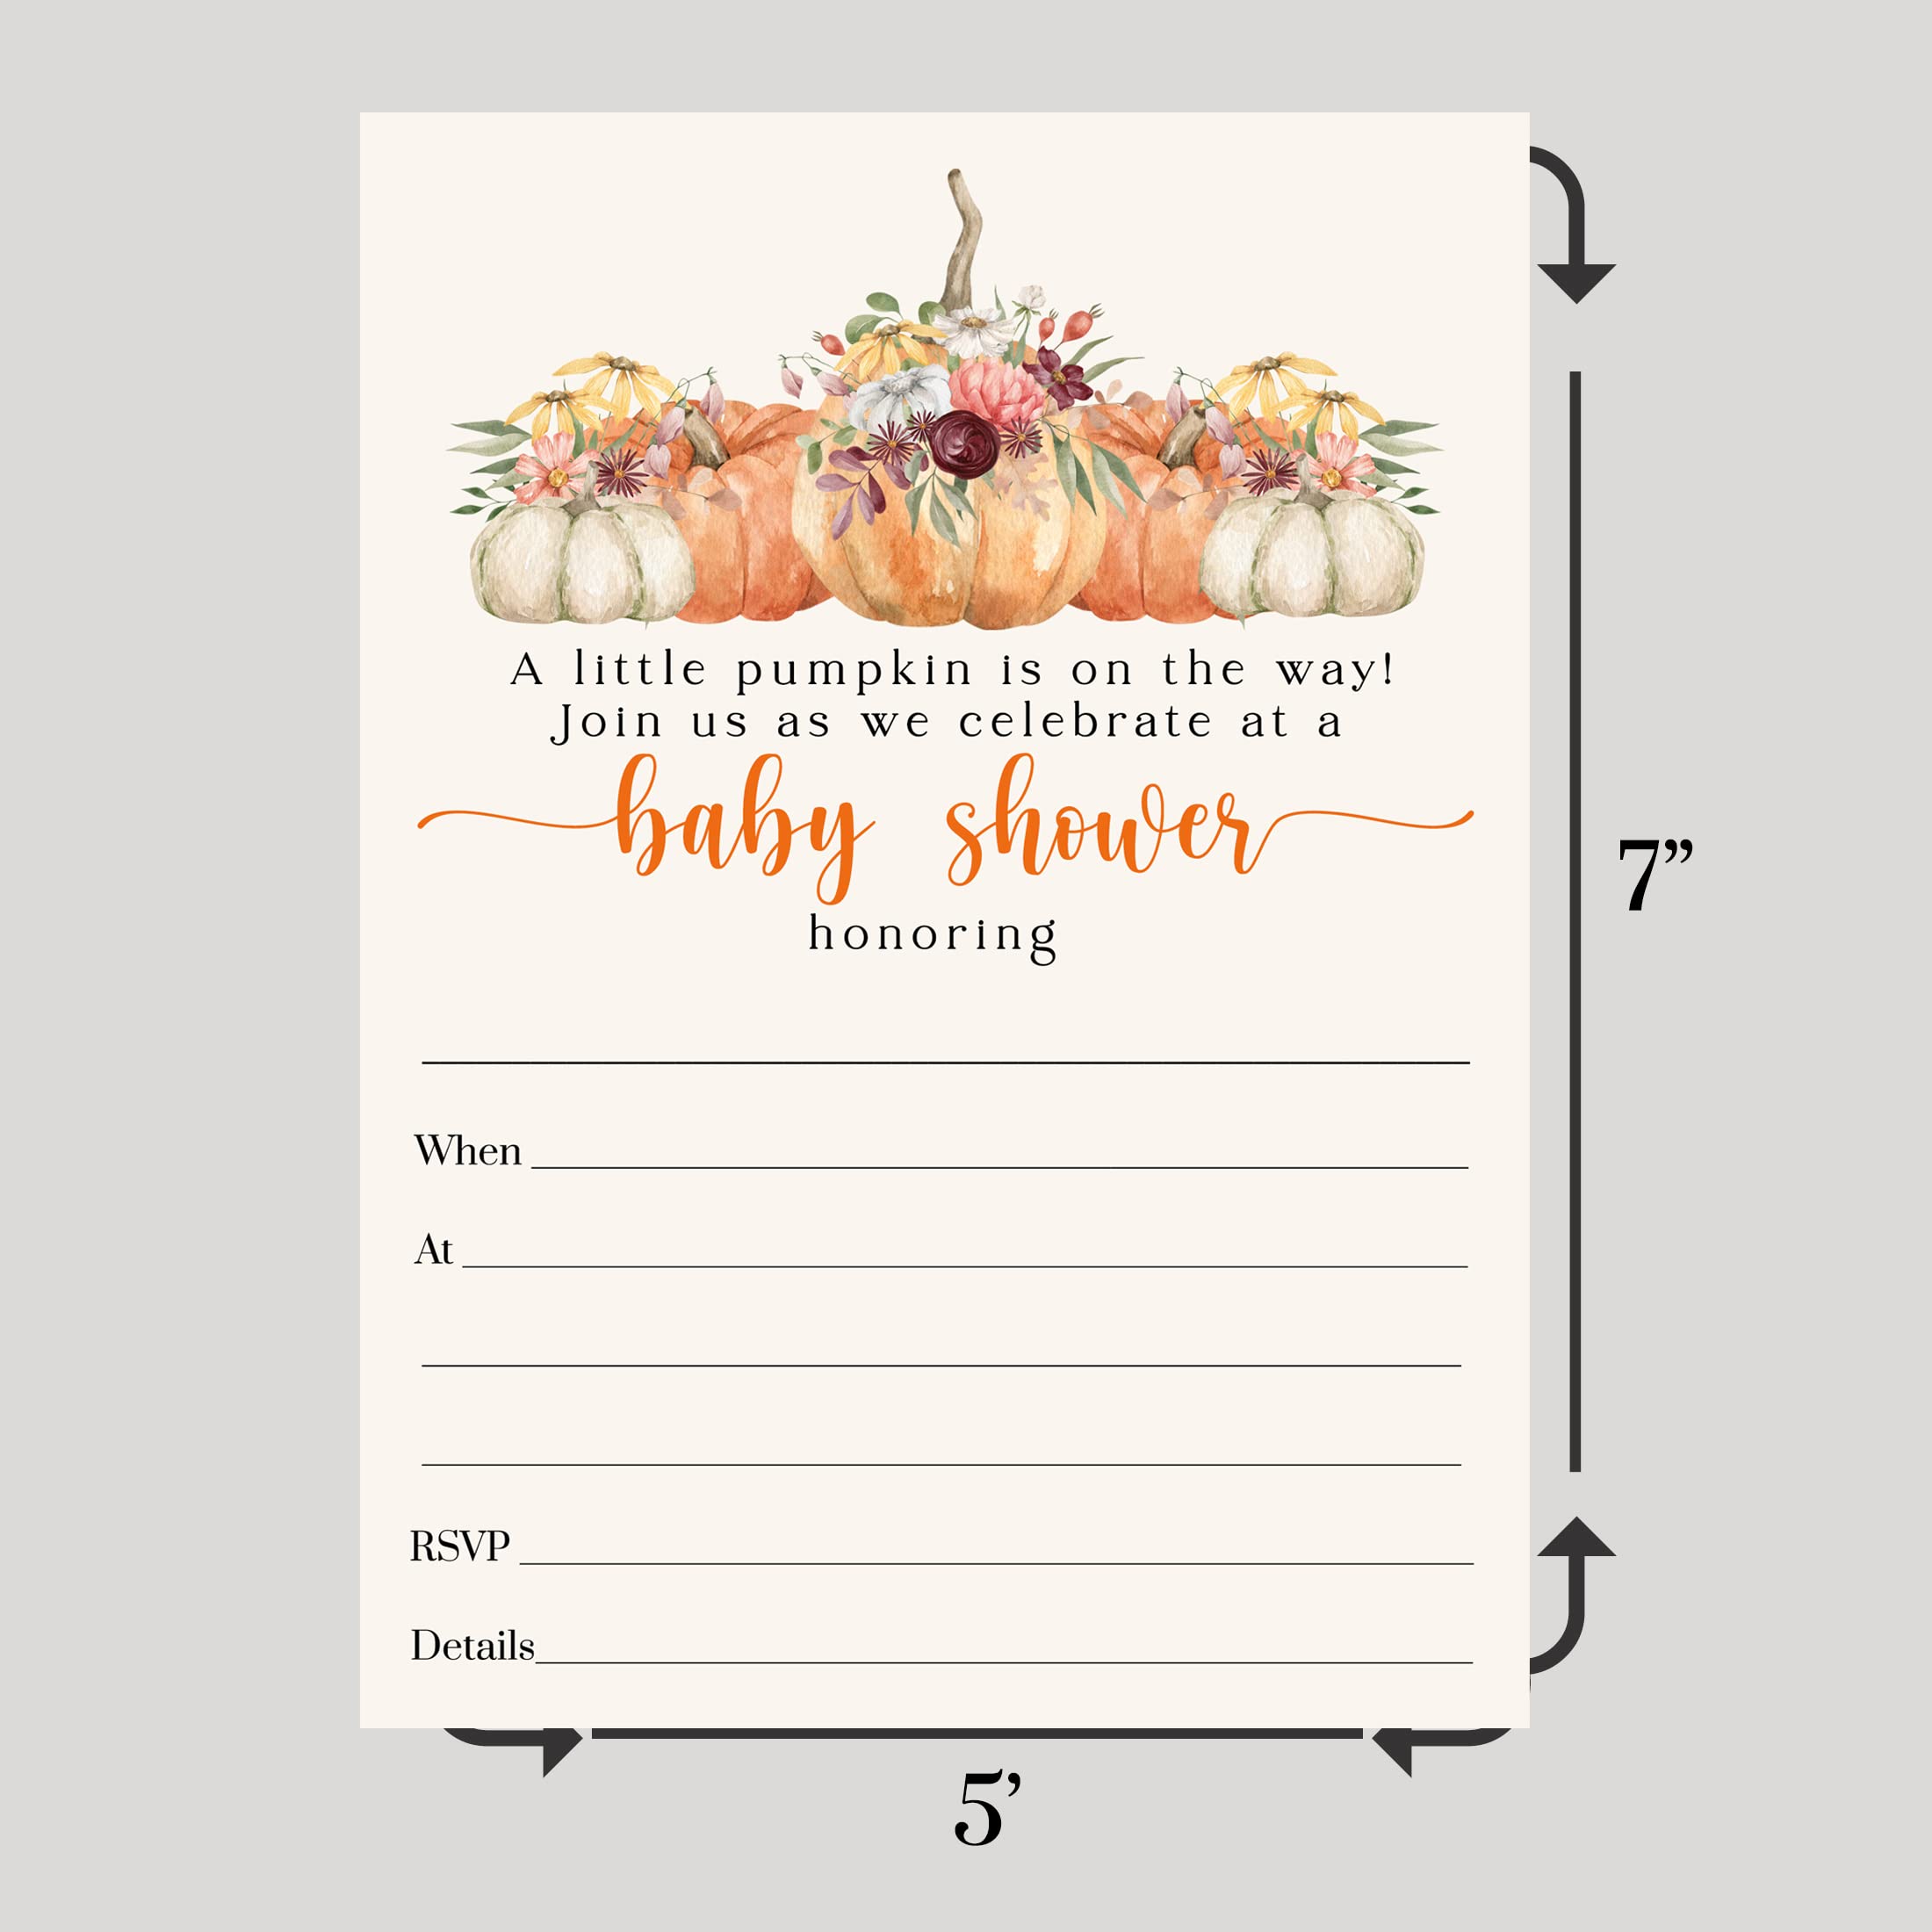 Paper Clever Party Little Pumpkin Baby Shower Invitations and Envelopes 25 Pack Rustic Invite Fill-In Blank - Fall Gender Reveal Boys Girls Autumn Themed - Printed 5x7 Size Card Set